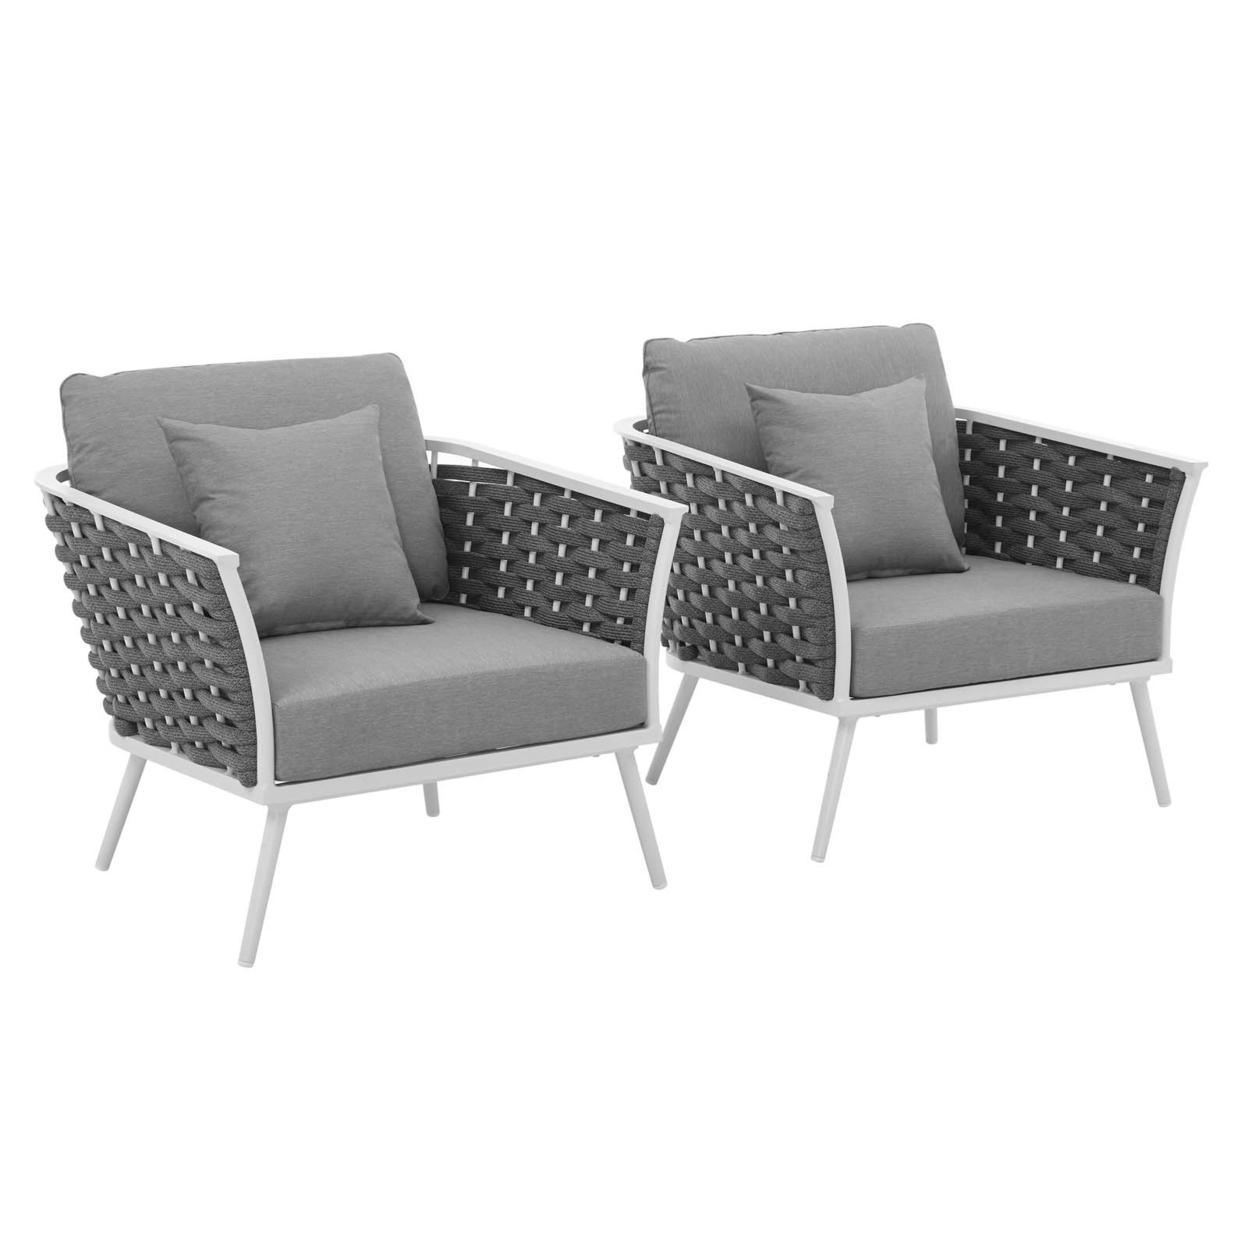 Stance Armchair Outdoor Patio Aluminum Set Of 2,White Gray